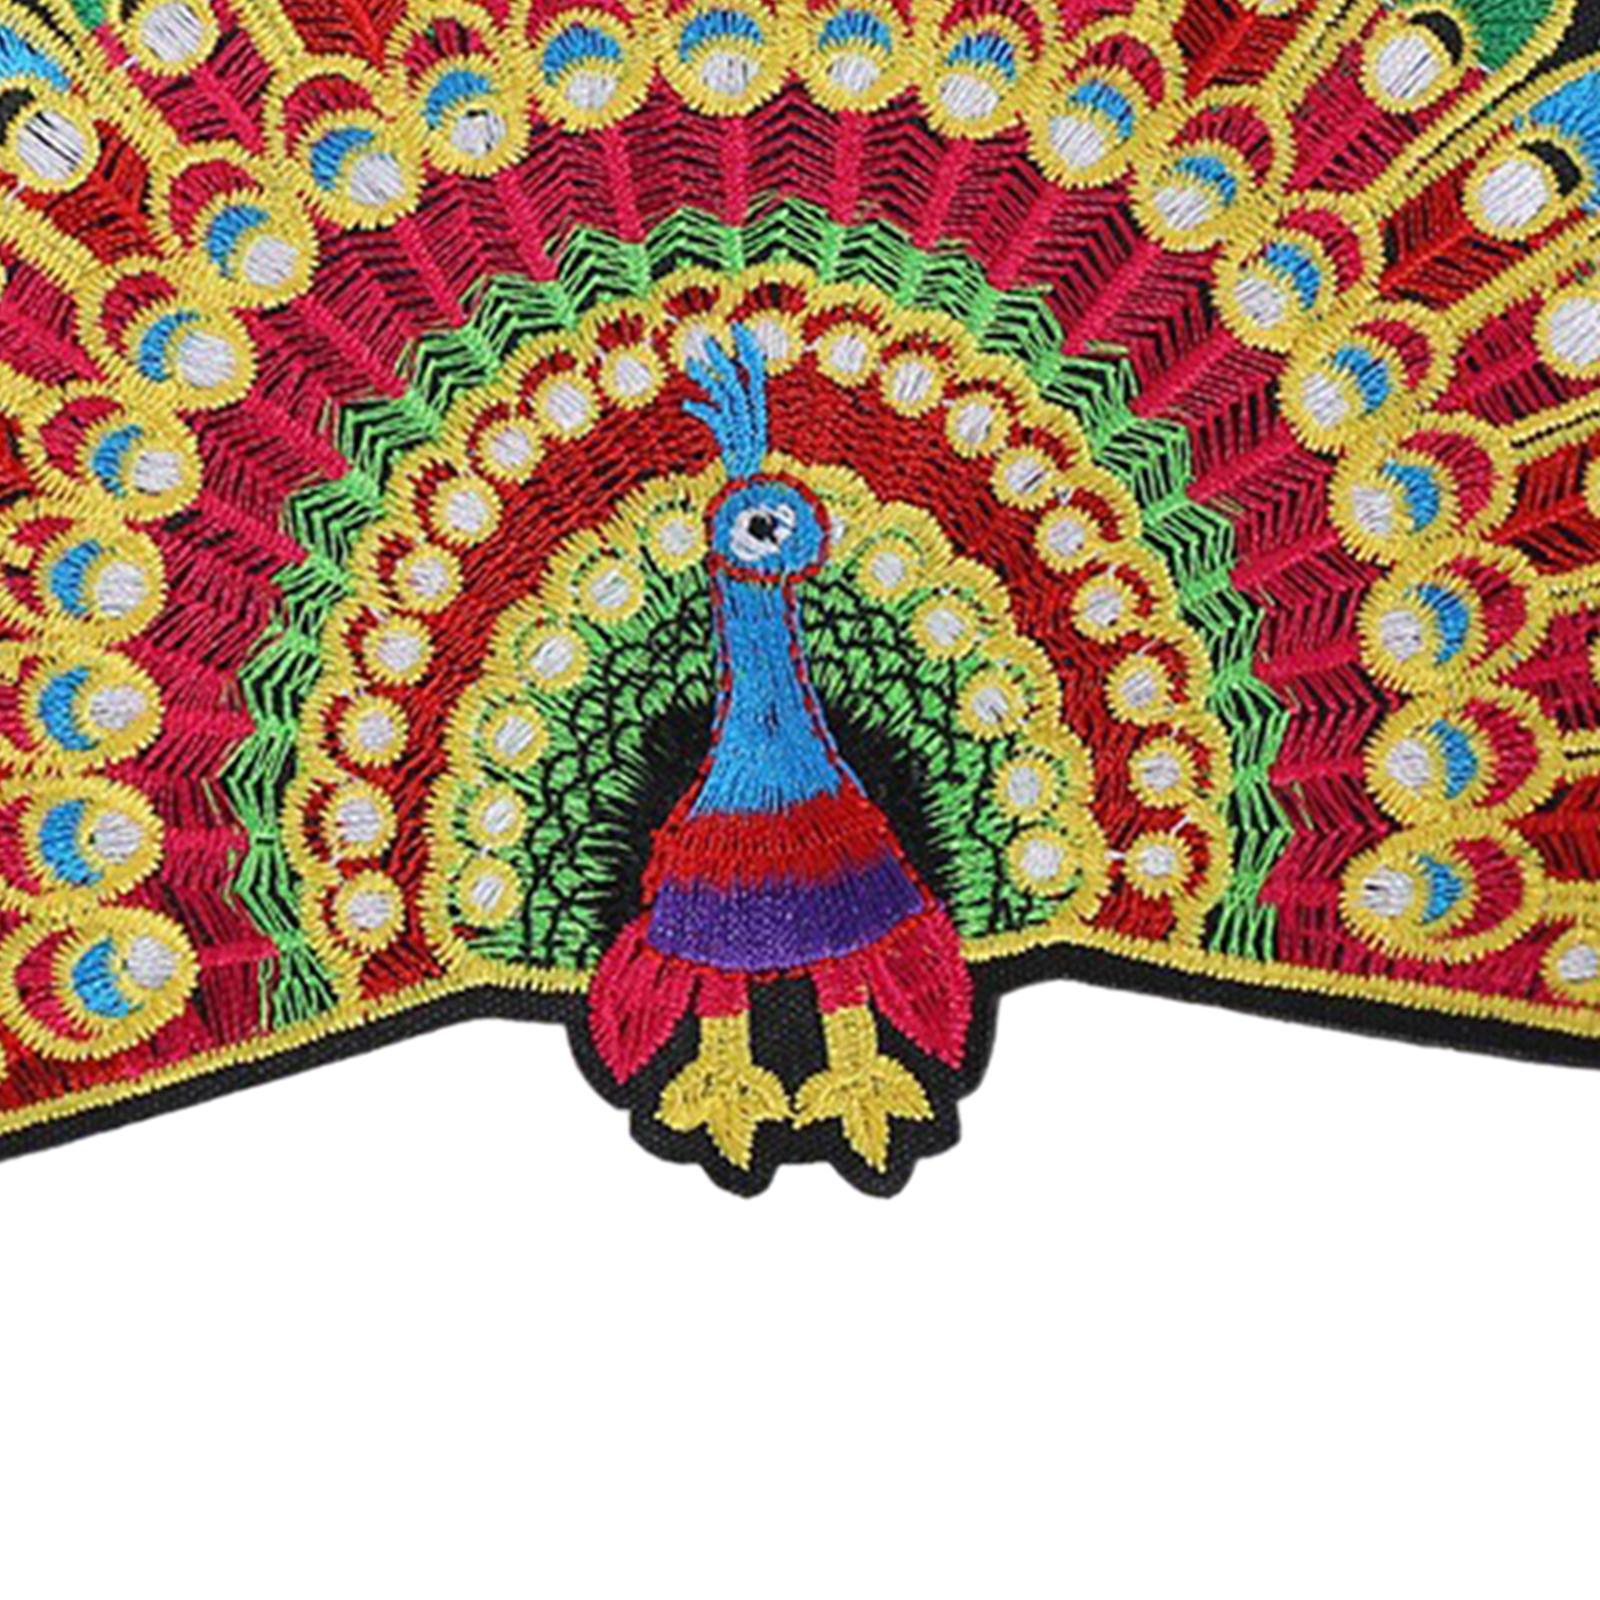 Peacock Patches Iron on/Sew on Embroidered Applique Embroidered Patches Embellishment Craft for DIY Clothes